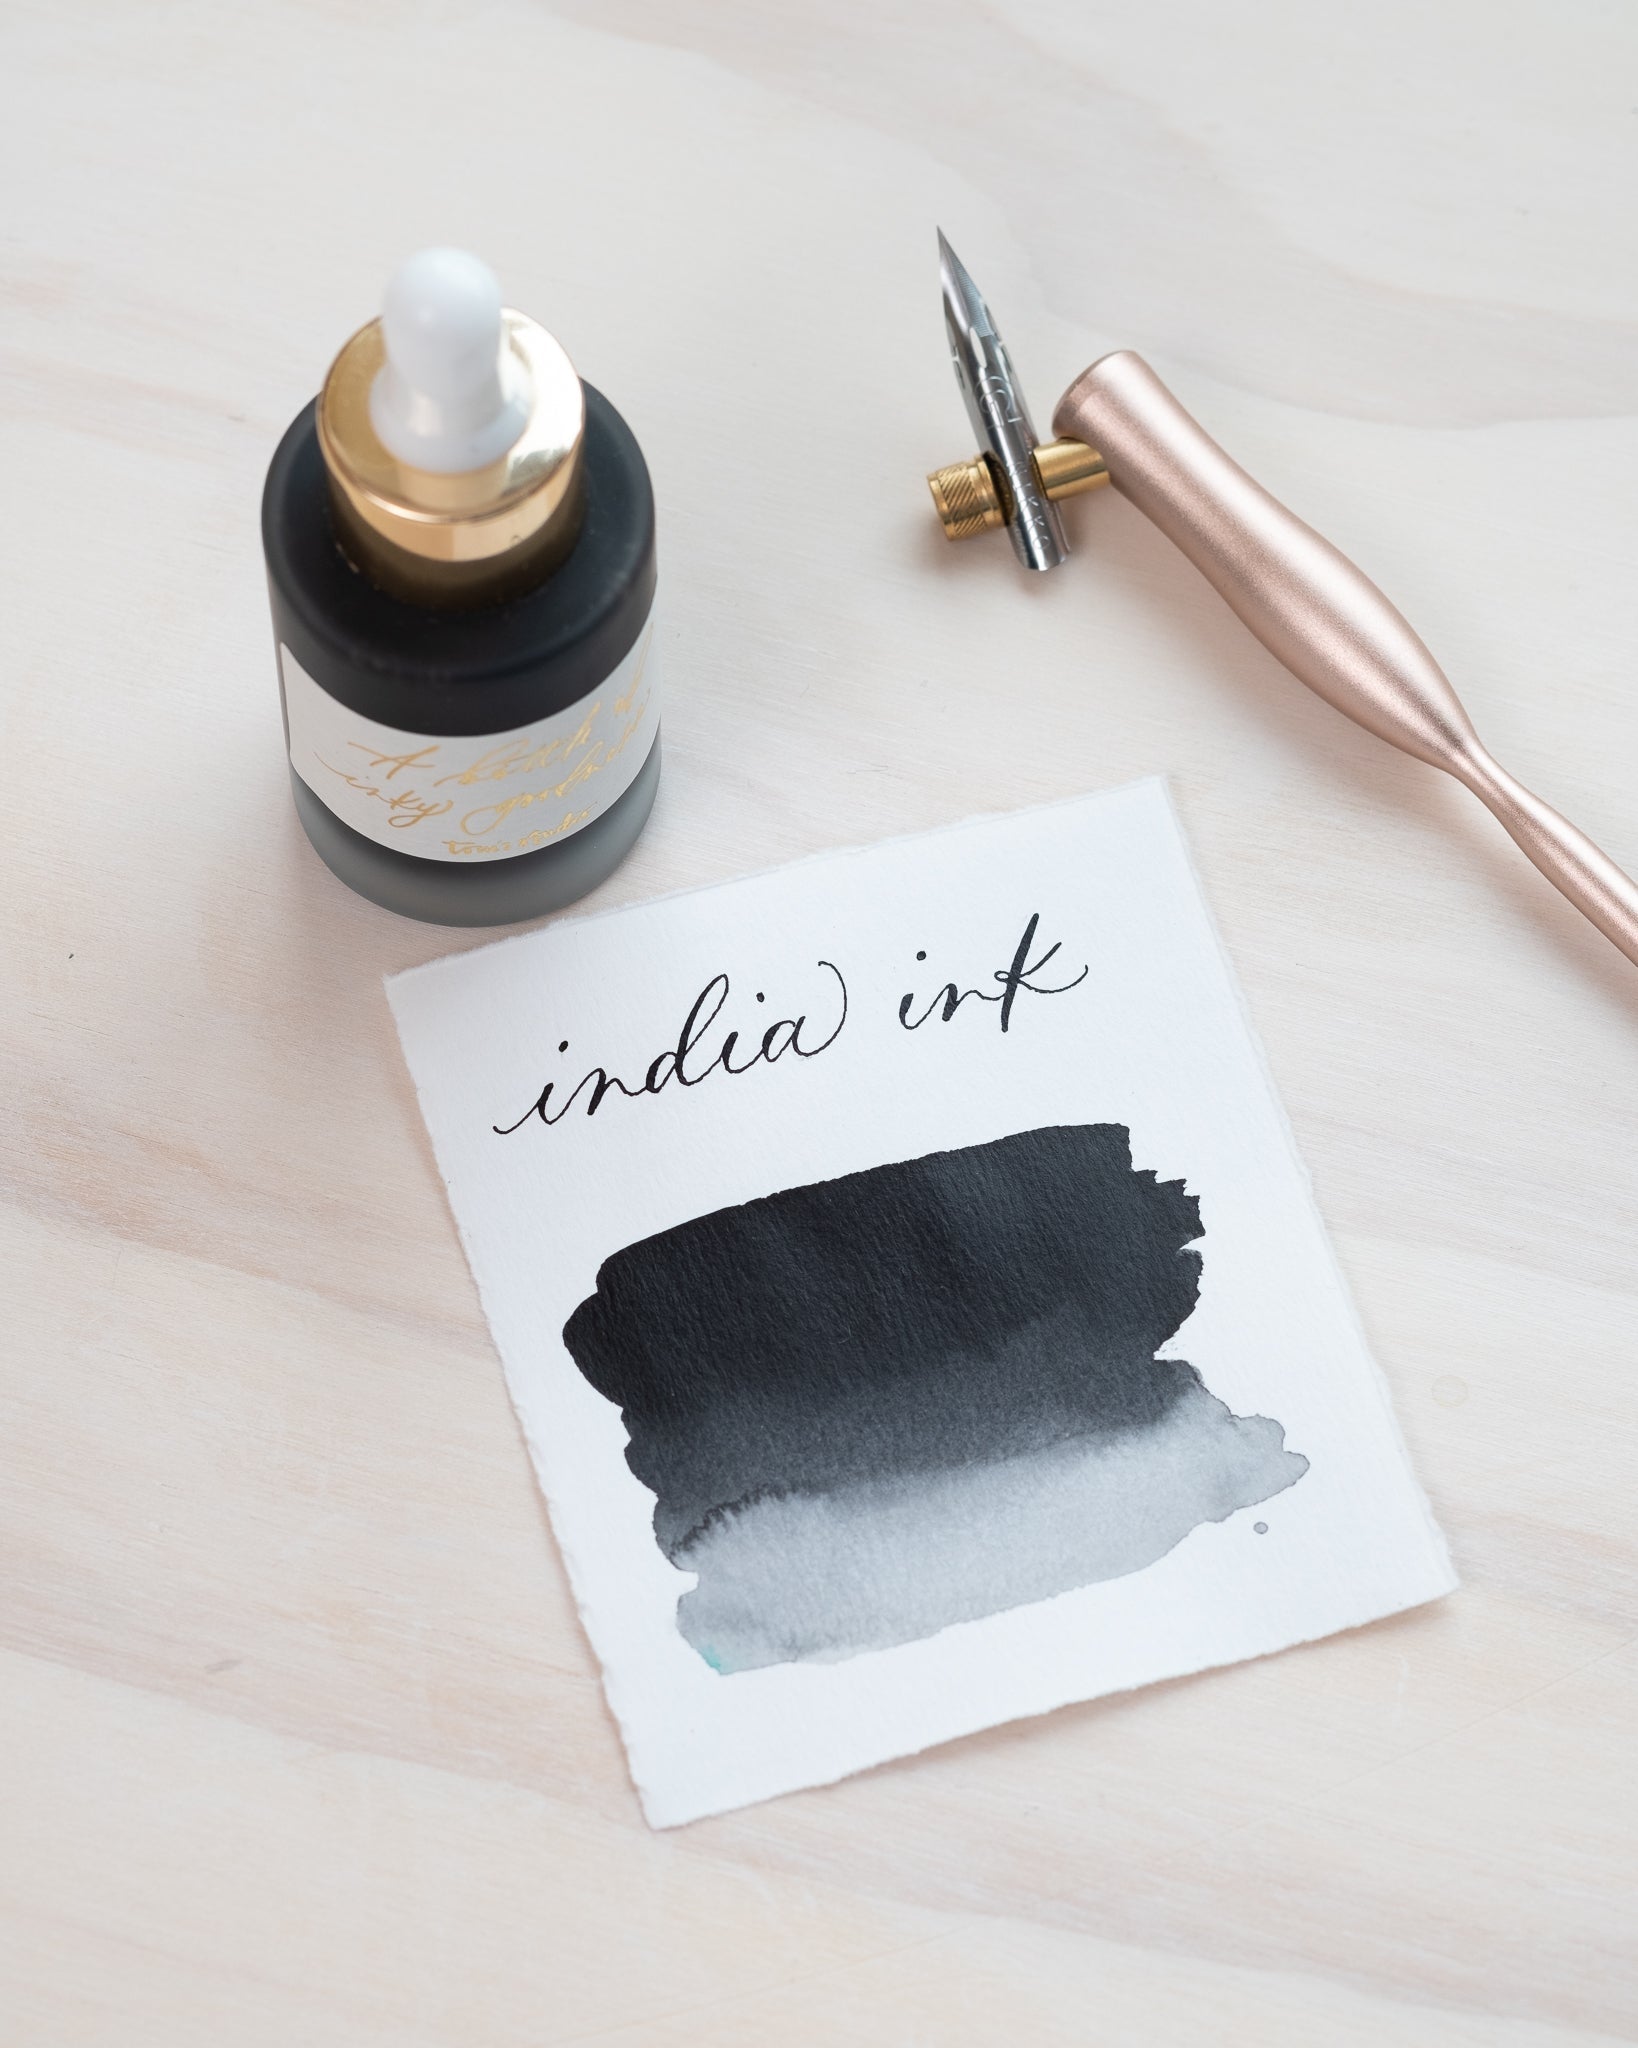 Black India Ink in bottle with swatch showing the ink colour